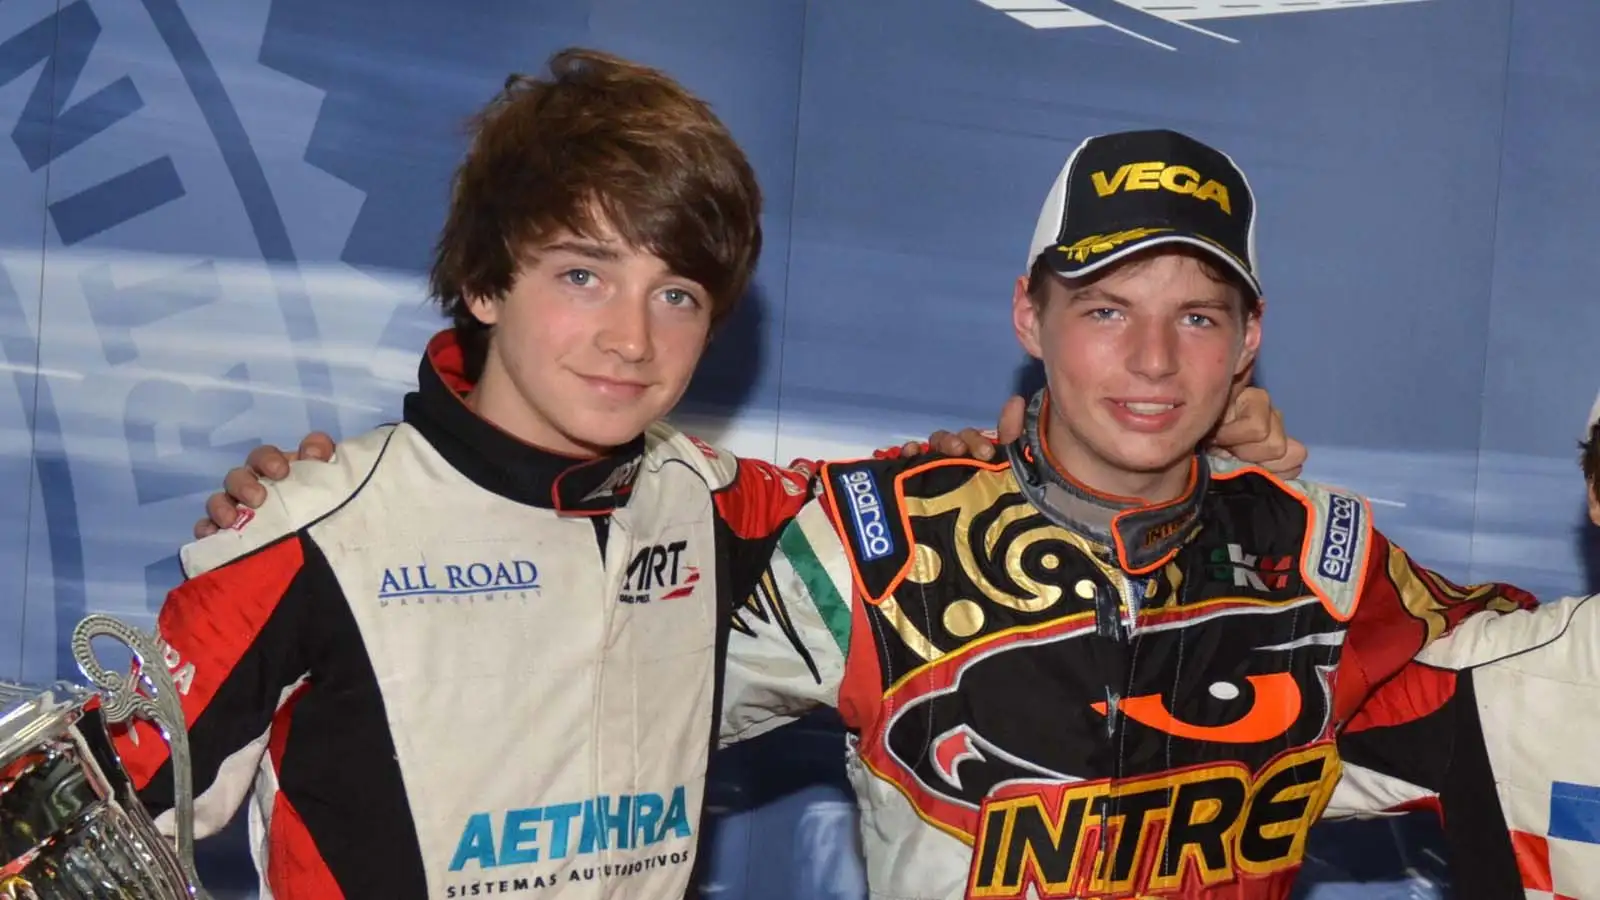 Future F1 stars Charles Leclerc and Max Verstappen share a podium in karting. June 2012.